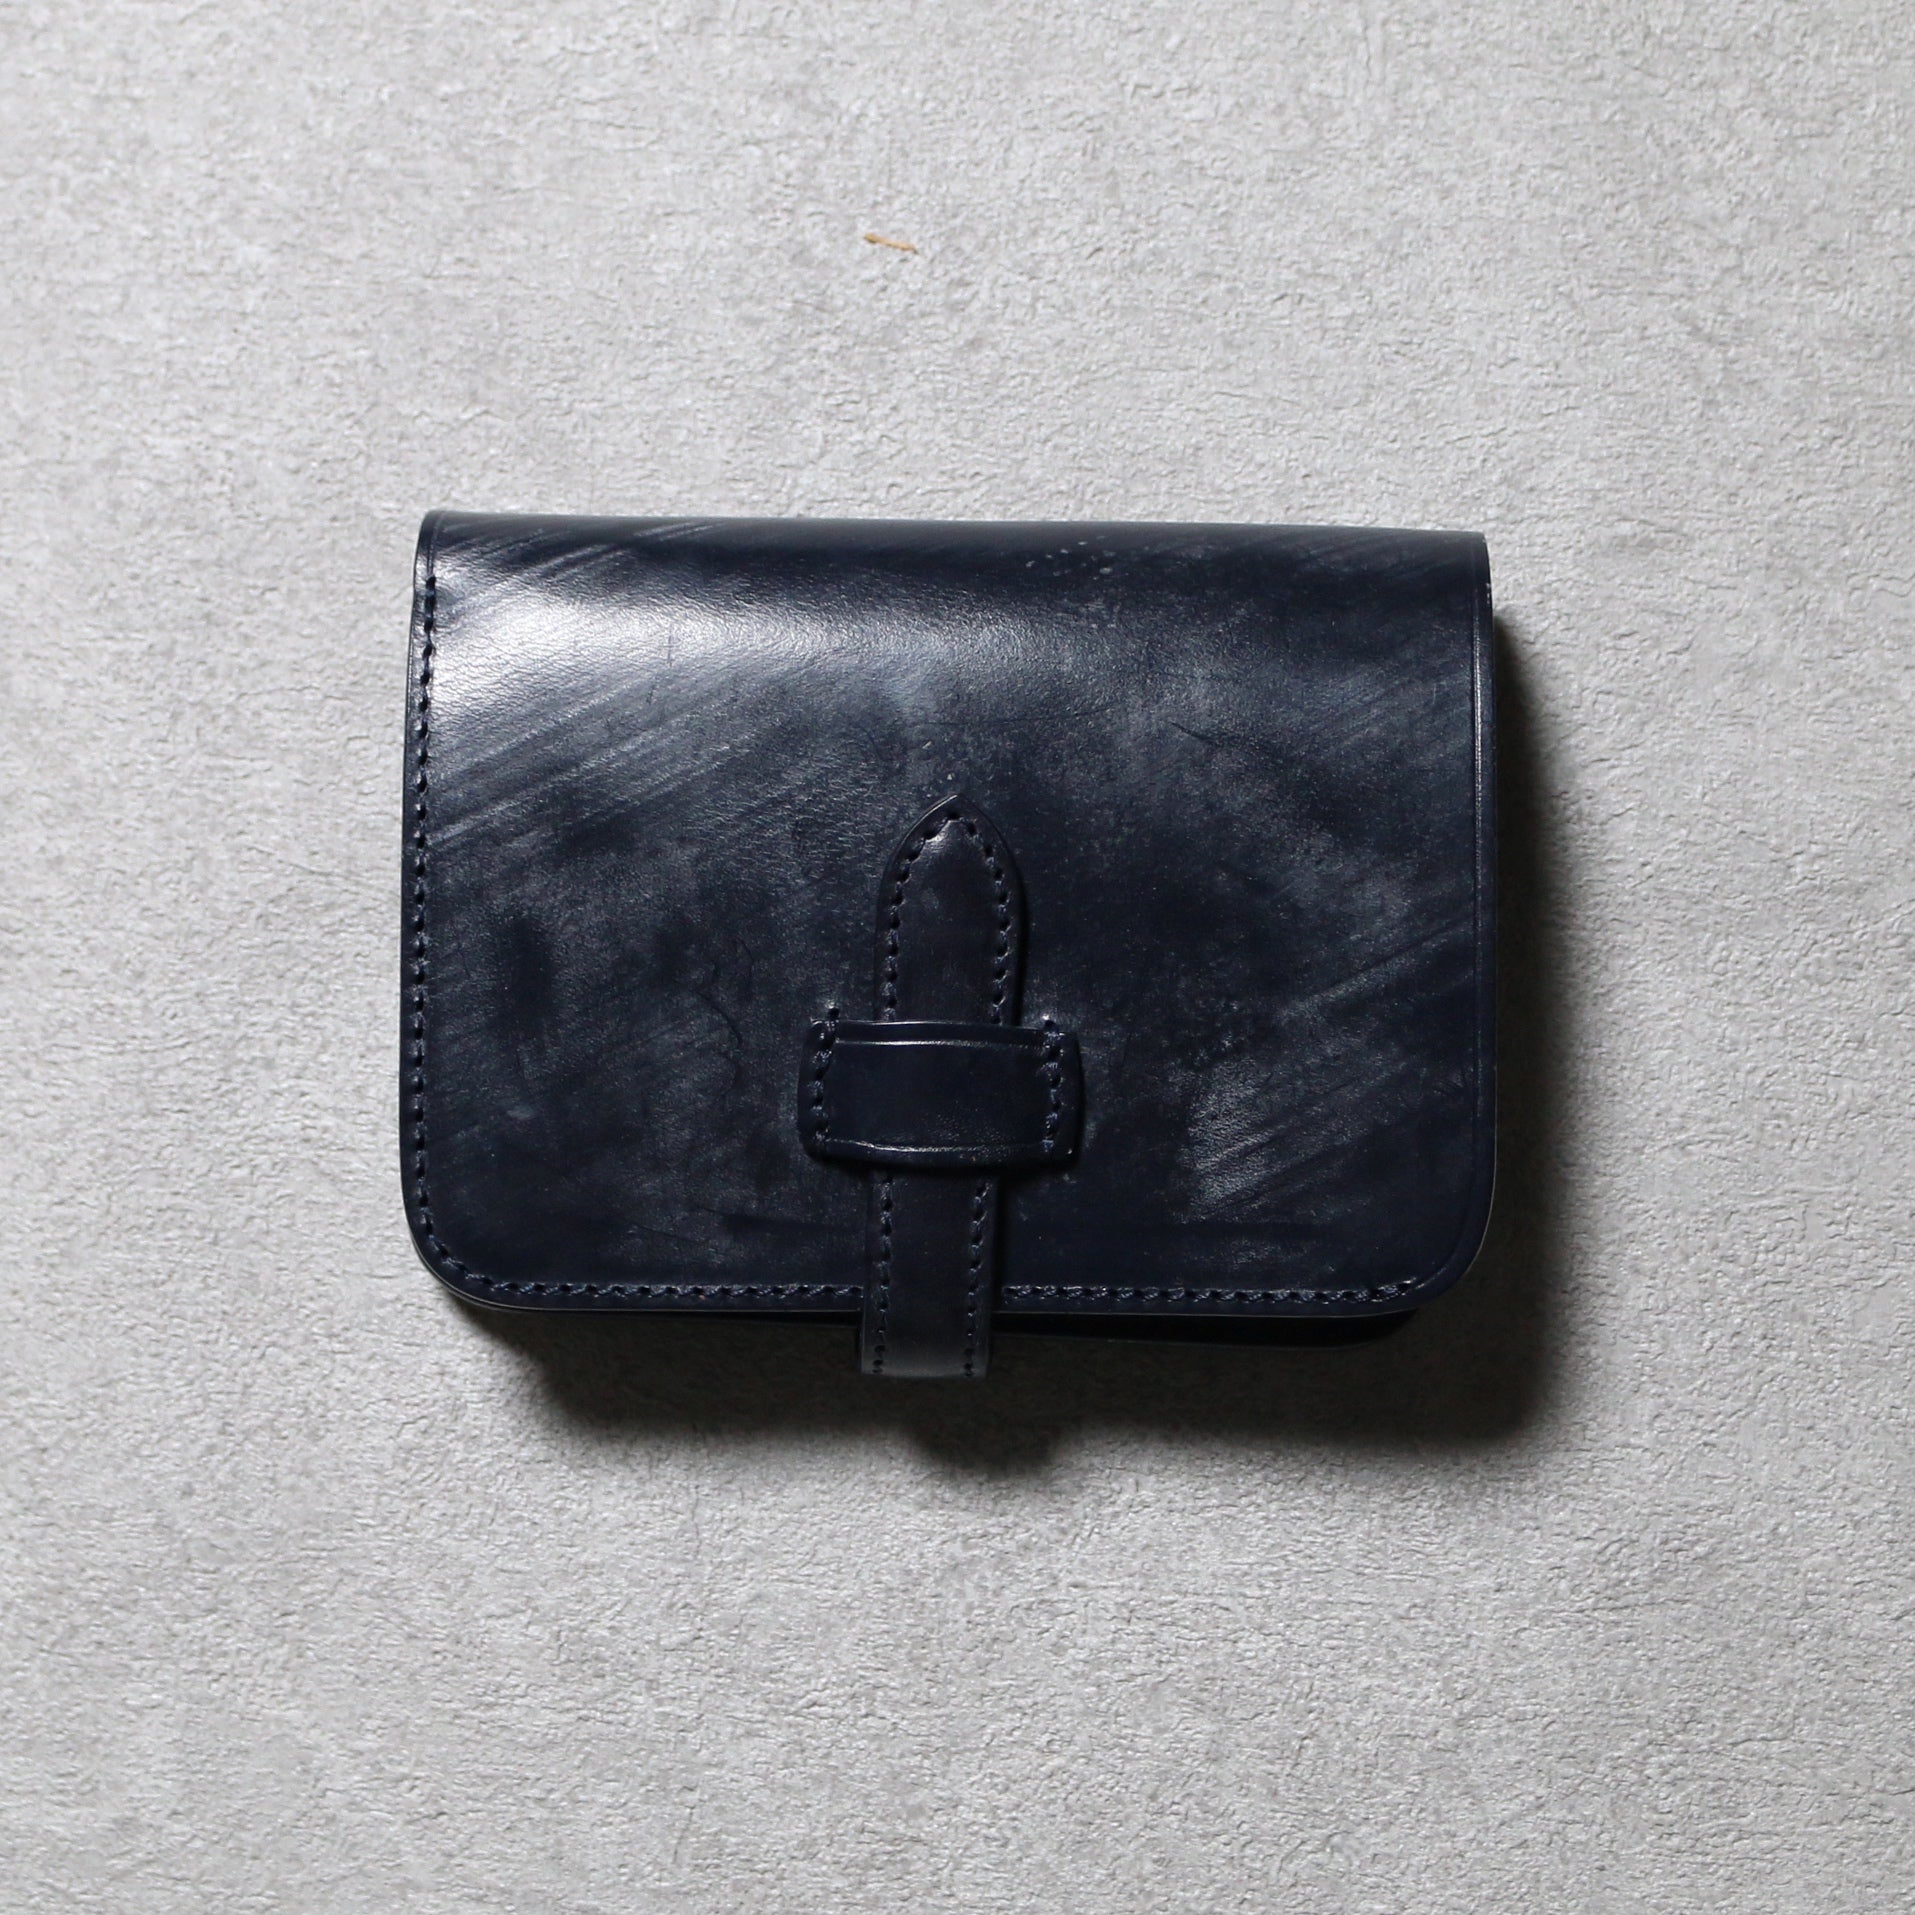 SL0171 bridle leather middle wallet